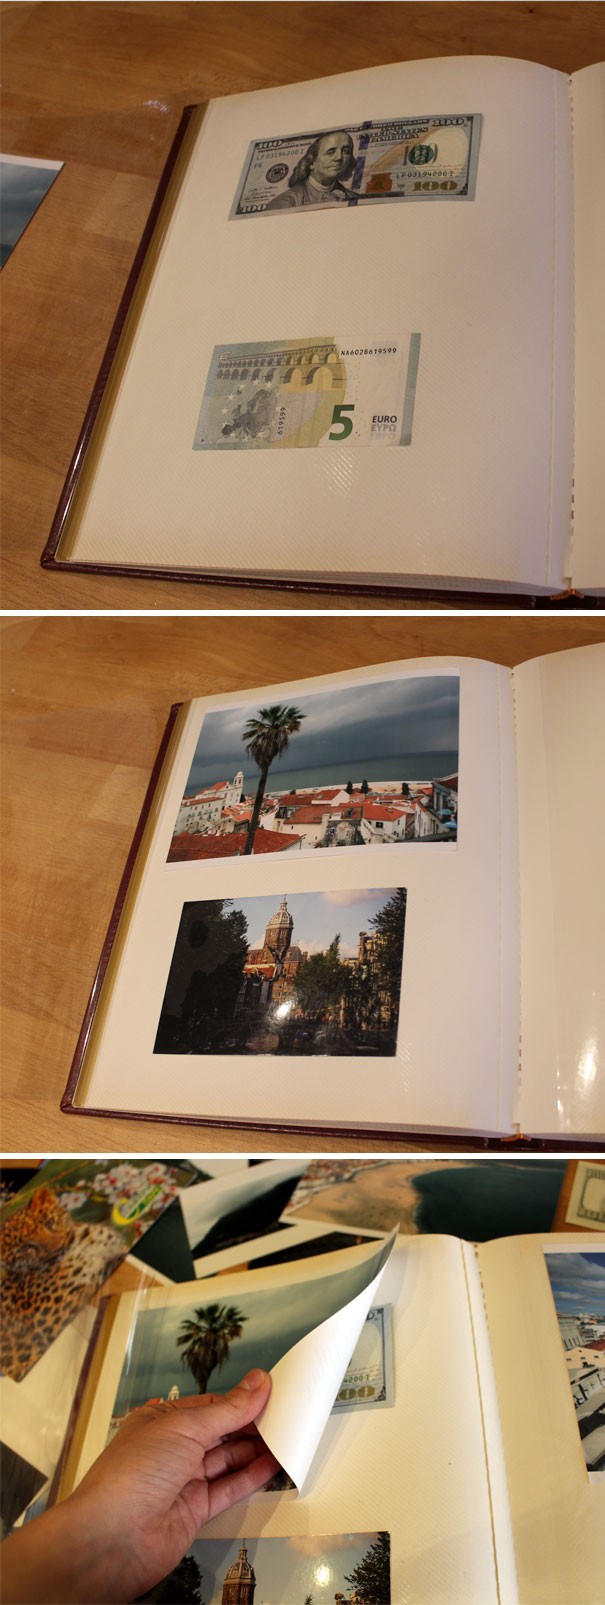 25. Here is how to use a photo album as a place to hide money.